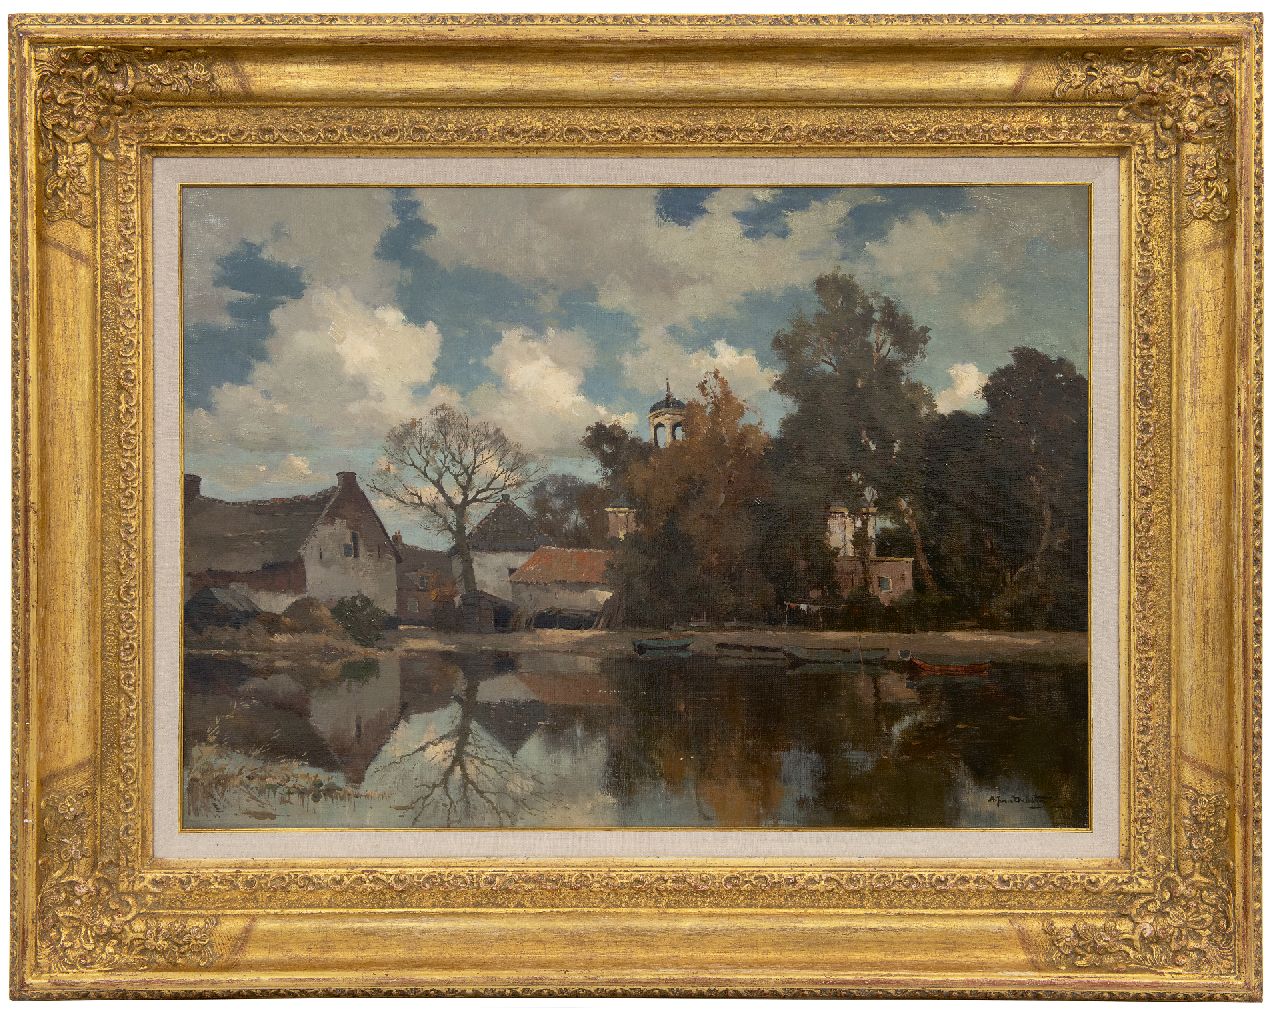 Driesten A.J. van | Arend Jan van Driesten | Paintings offered for sale | Village near the water, oil on canvas 50.5 x 70.0 cm, signed l.r.